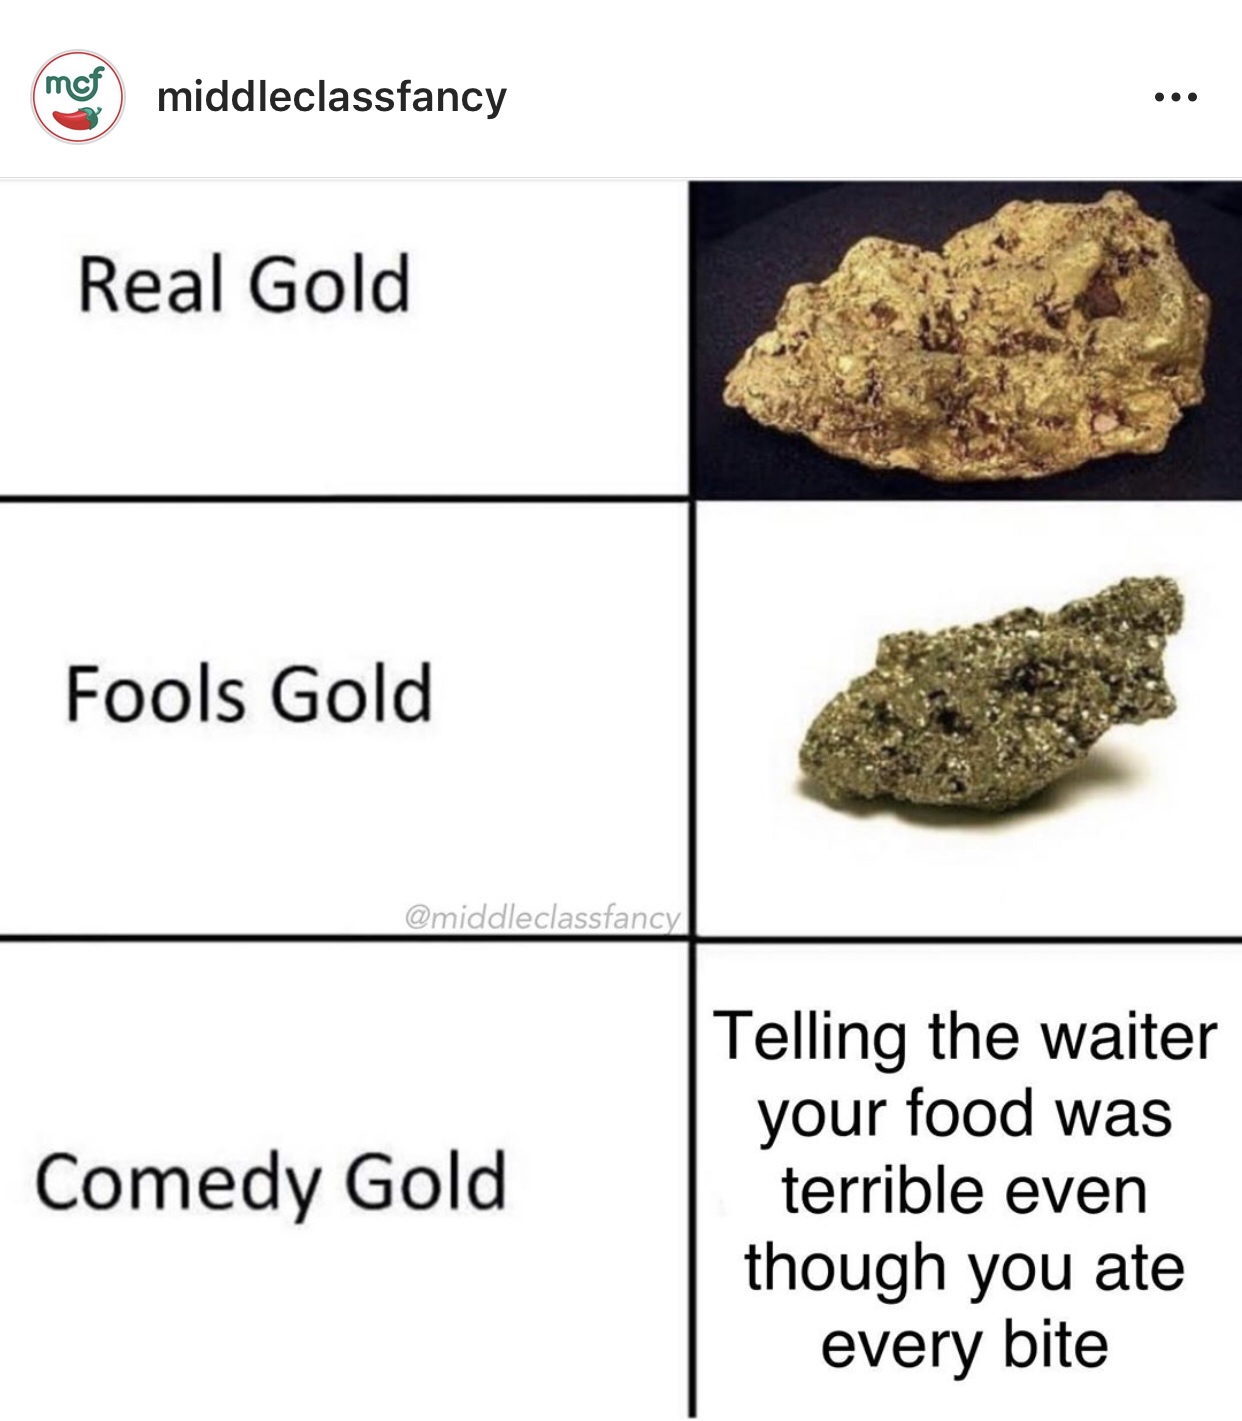 real gold fools gold comedy gold meme - mor middleclassfancy Real Gold Fools Gold Comedy Gold Telling the waiter your food was terrible even though you ate every bite